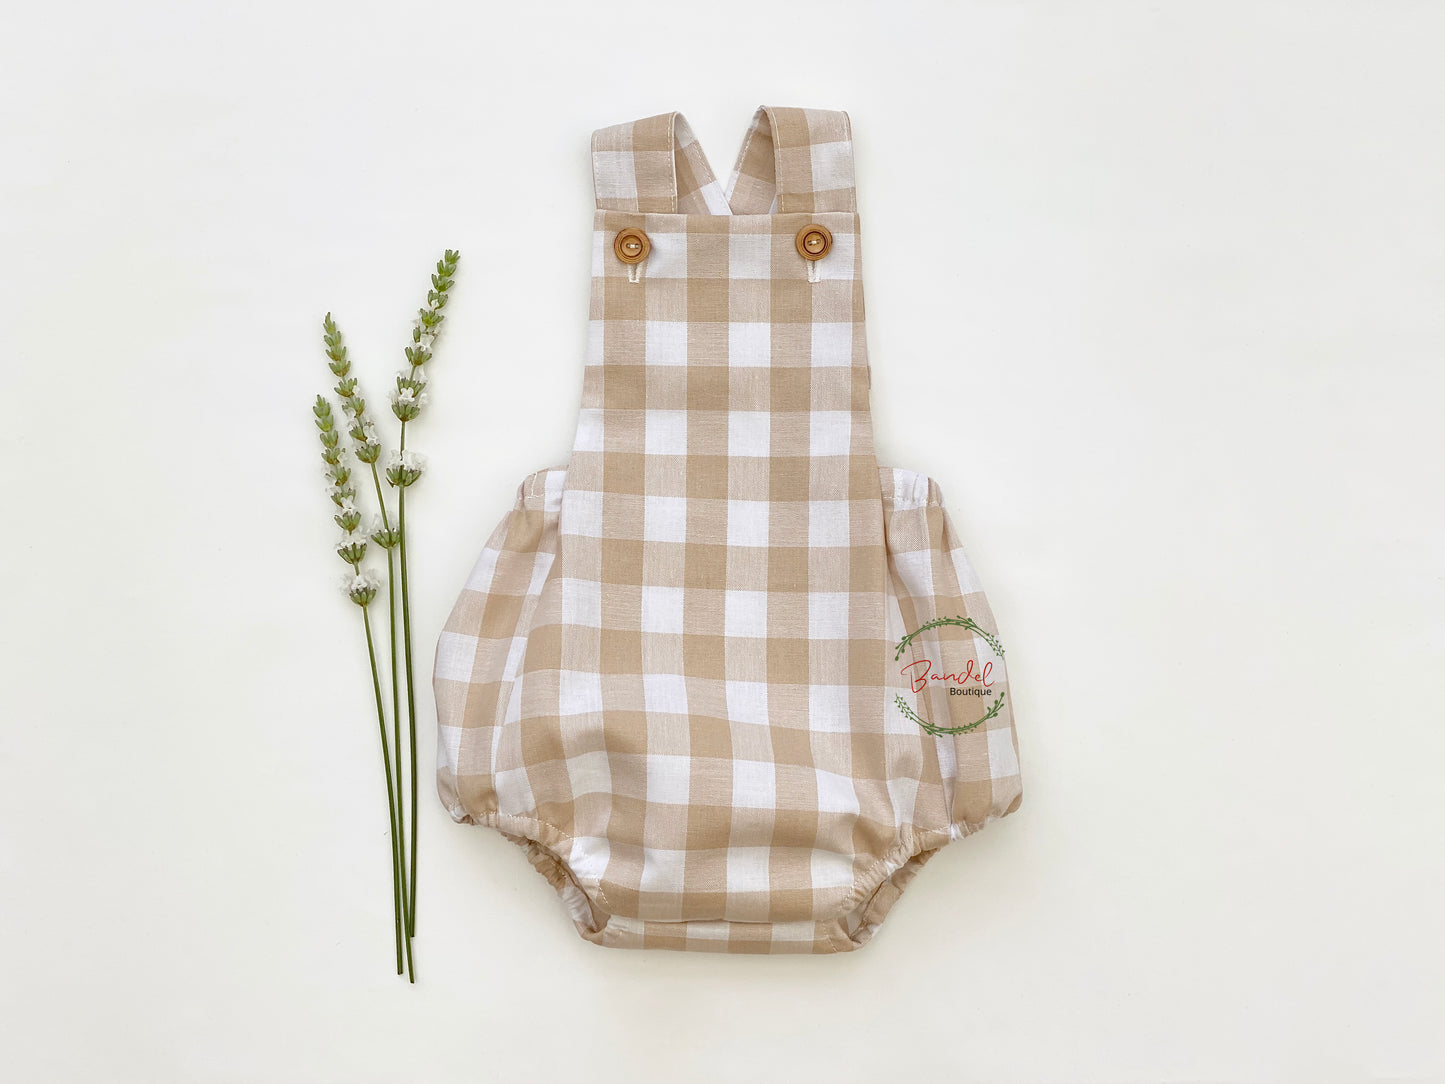 Cream Gingham Cotton Baby Romper. Crafted from breathable cotton fabric in an easy-to-care-for cream check pattern, it features two shoulder straps to keep them secure and a convenient front wooden button closure for easy dressing.